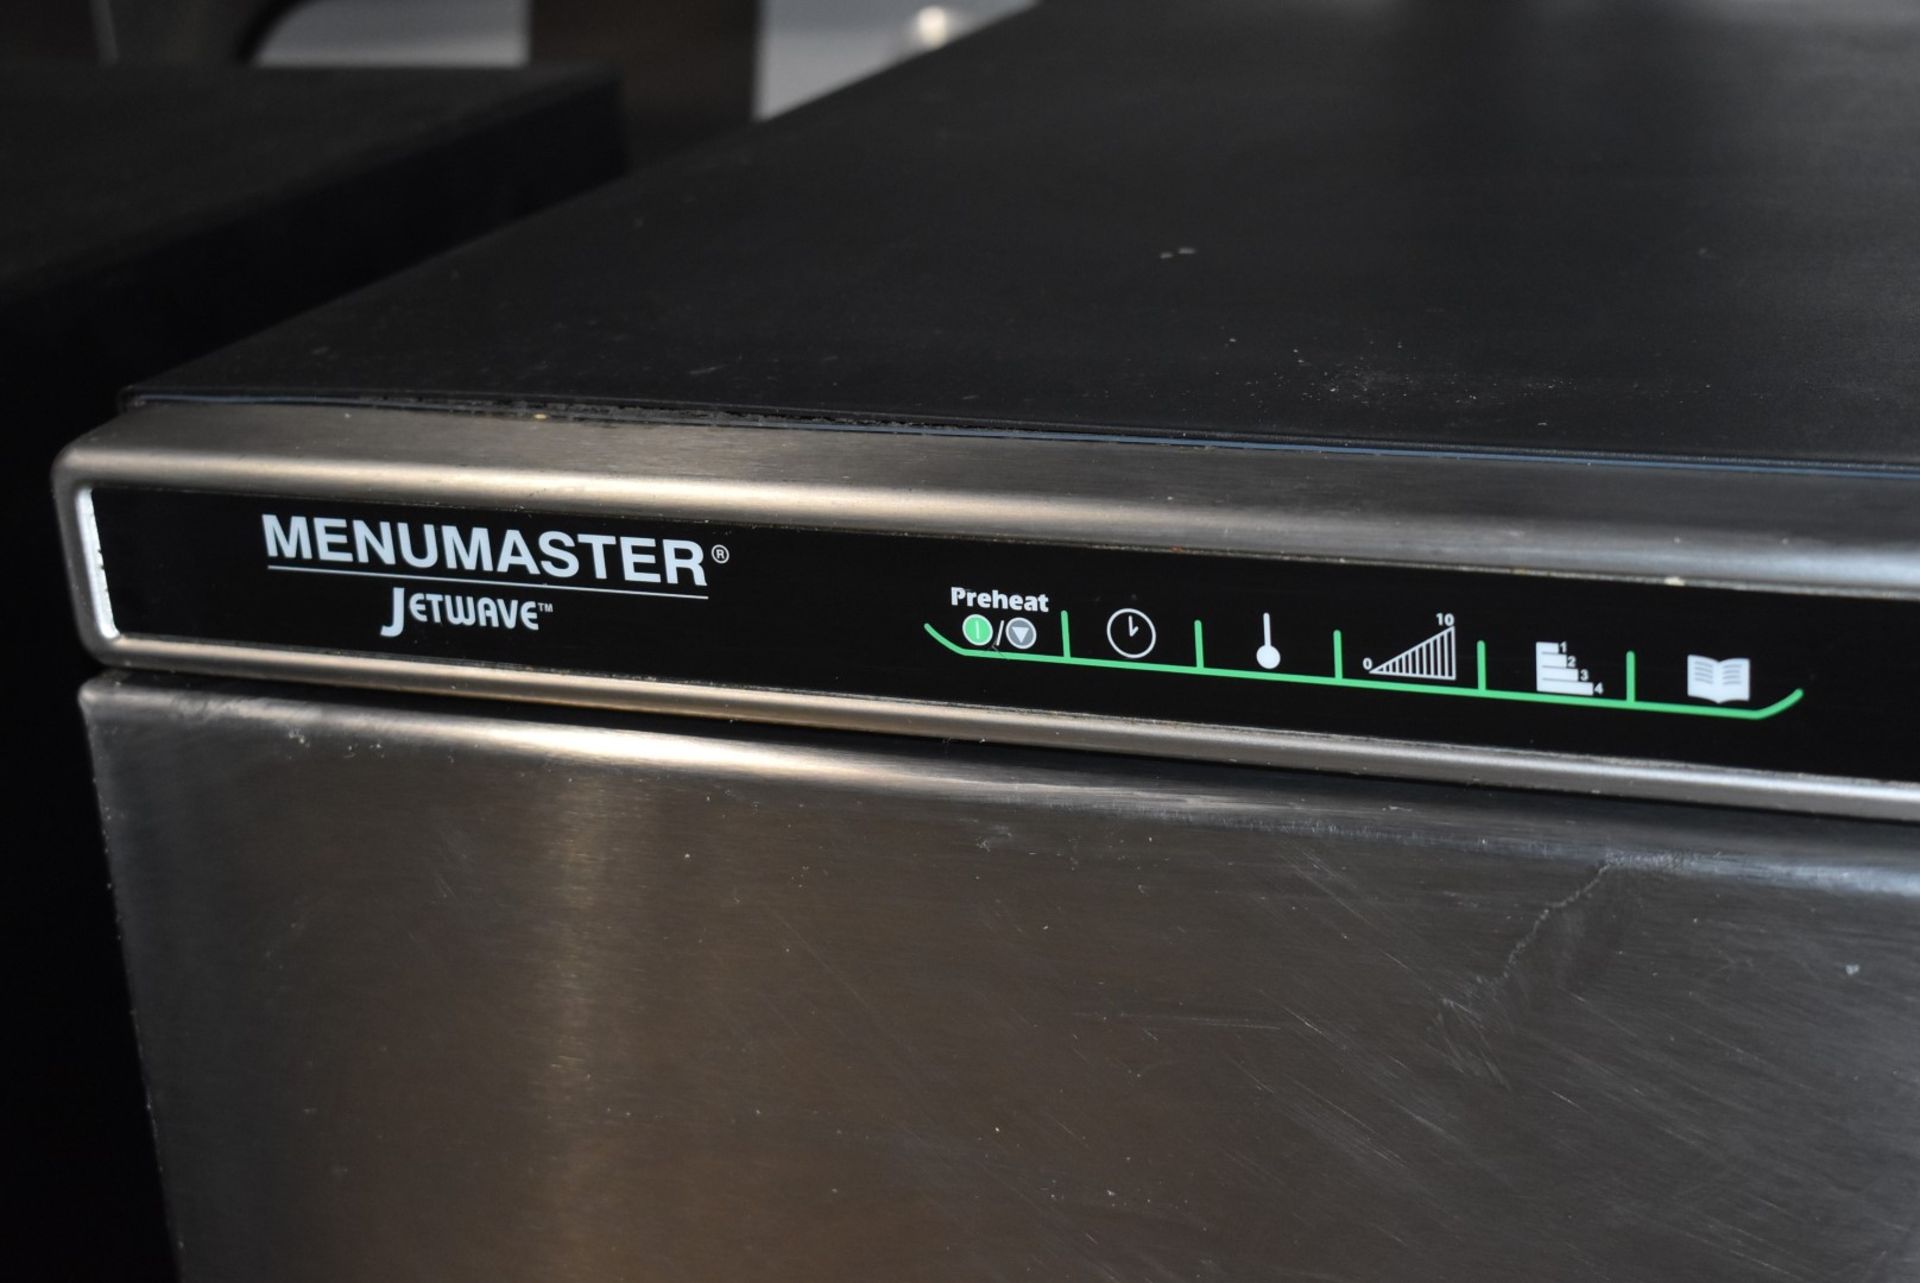 1 x Menumaster Jetwave JET514U High Speed Combination Microwave Oven - RRP £2,400 - Recently Remove - Image 11 of 11